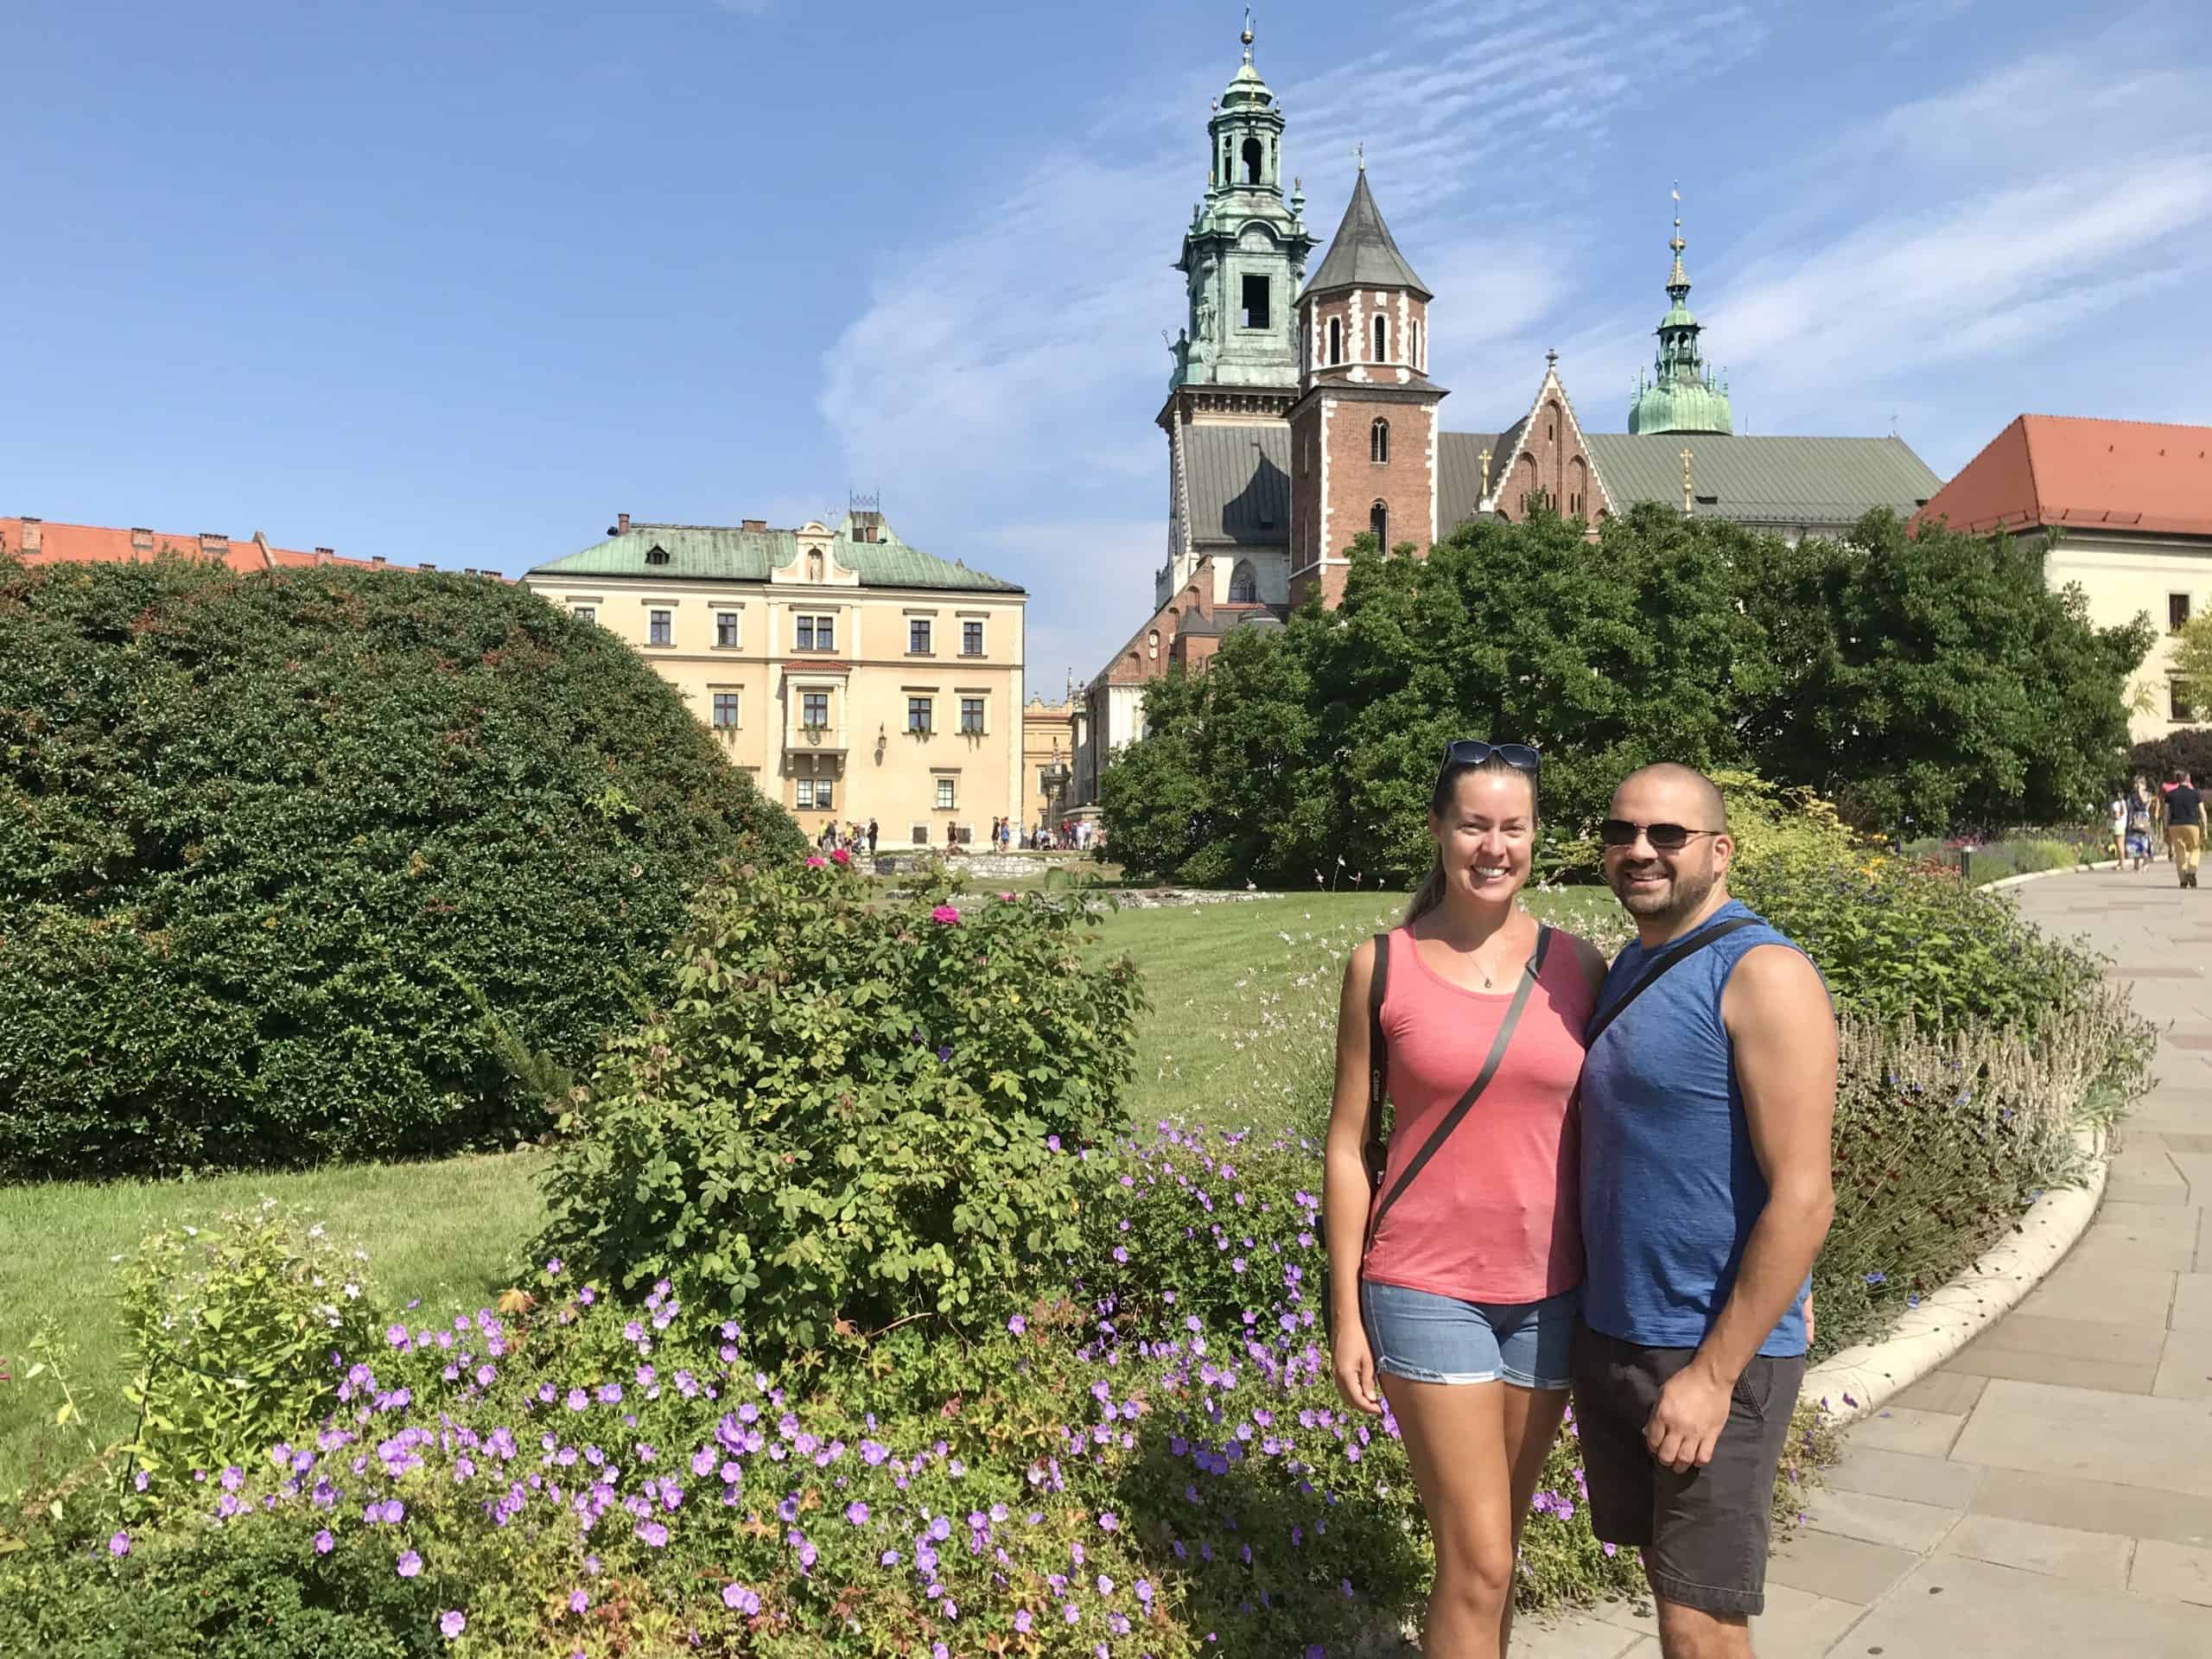 Joannda and Omer in front of Wawel Cathedral in Krakow Wawel Castle grounds